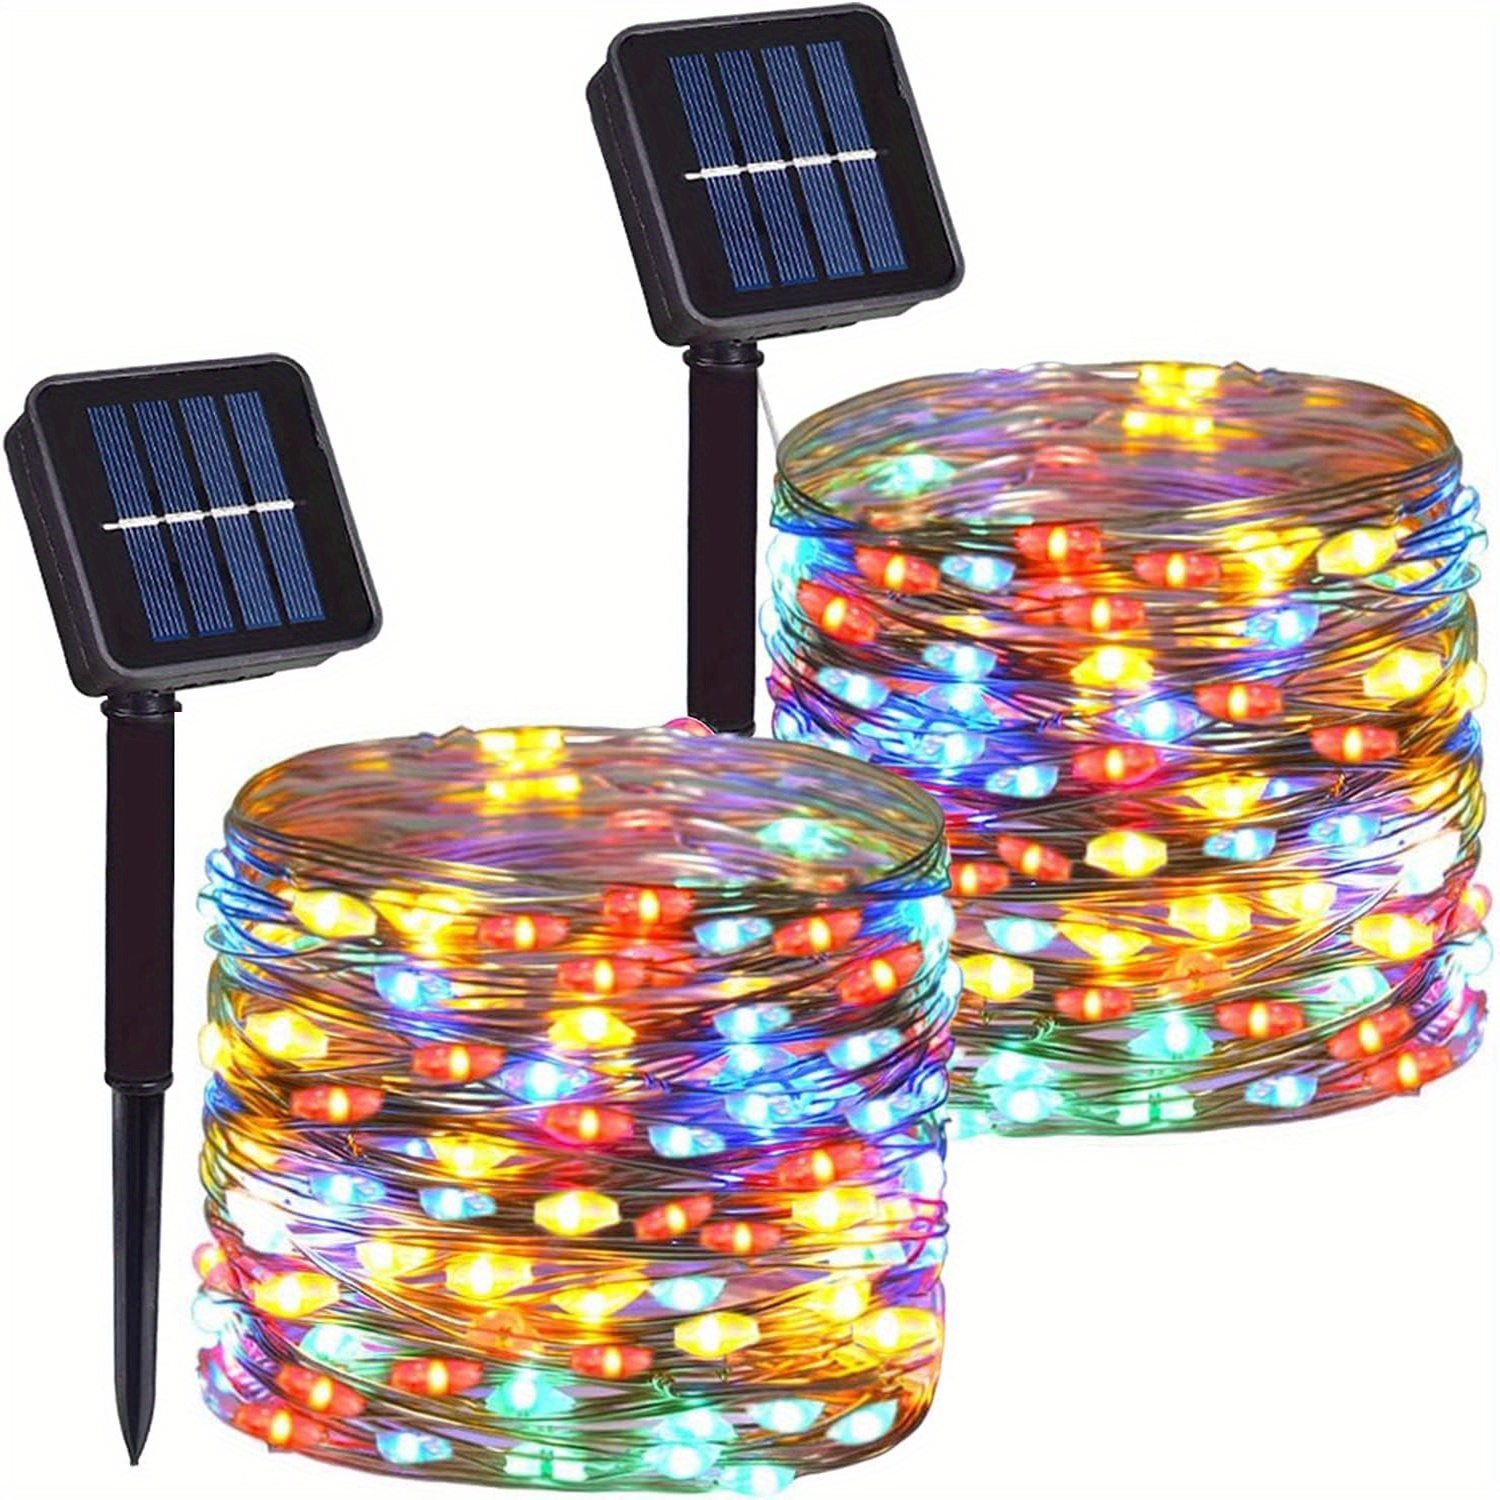 

2/ 4 Pack 110 Ft 300 Led Solar Powered Copper Wire String Lights Outdoor, Waterproof, 8 Modes Fairy Lights For Garden, Patio, Party, Yard, Christmas